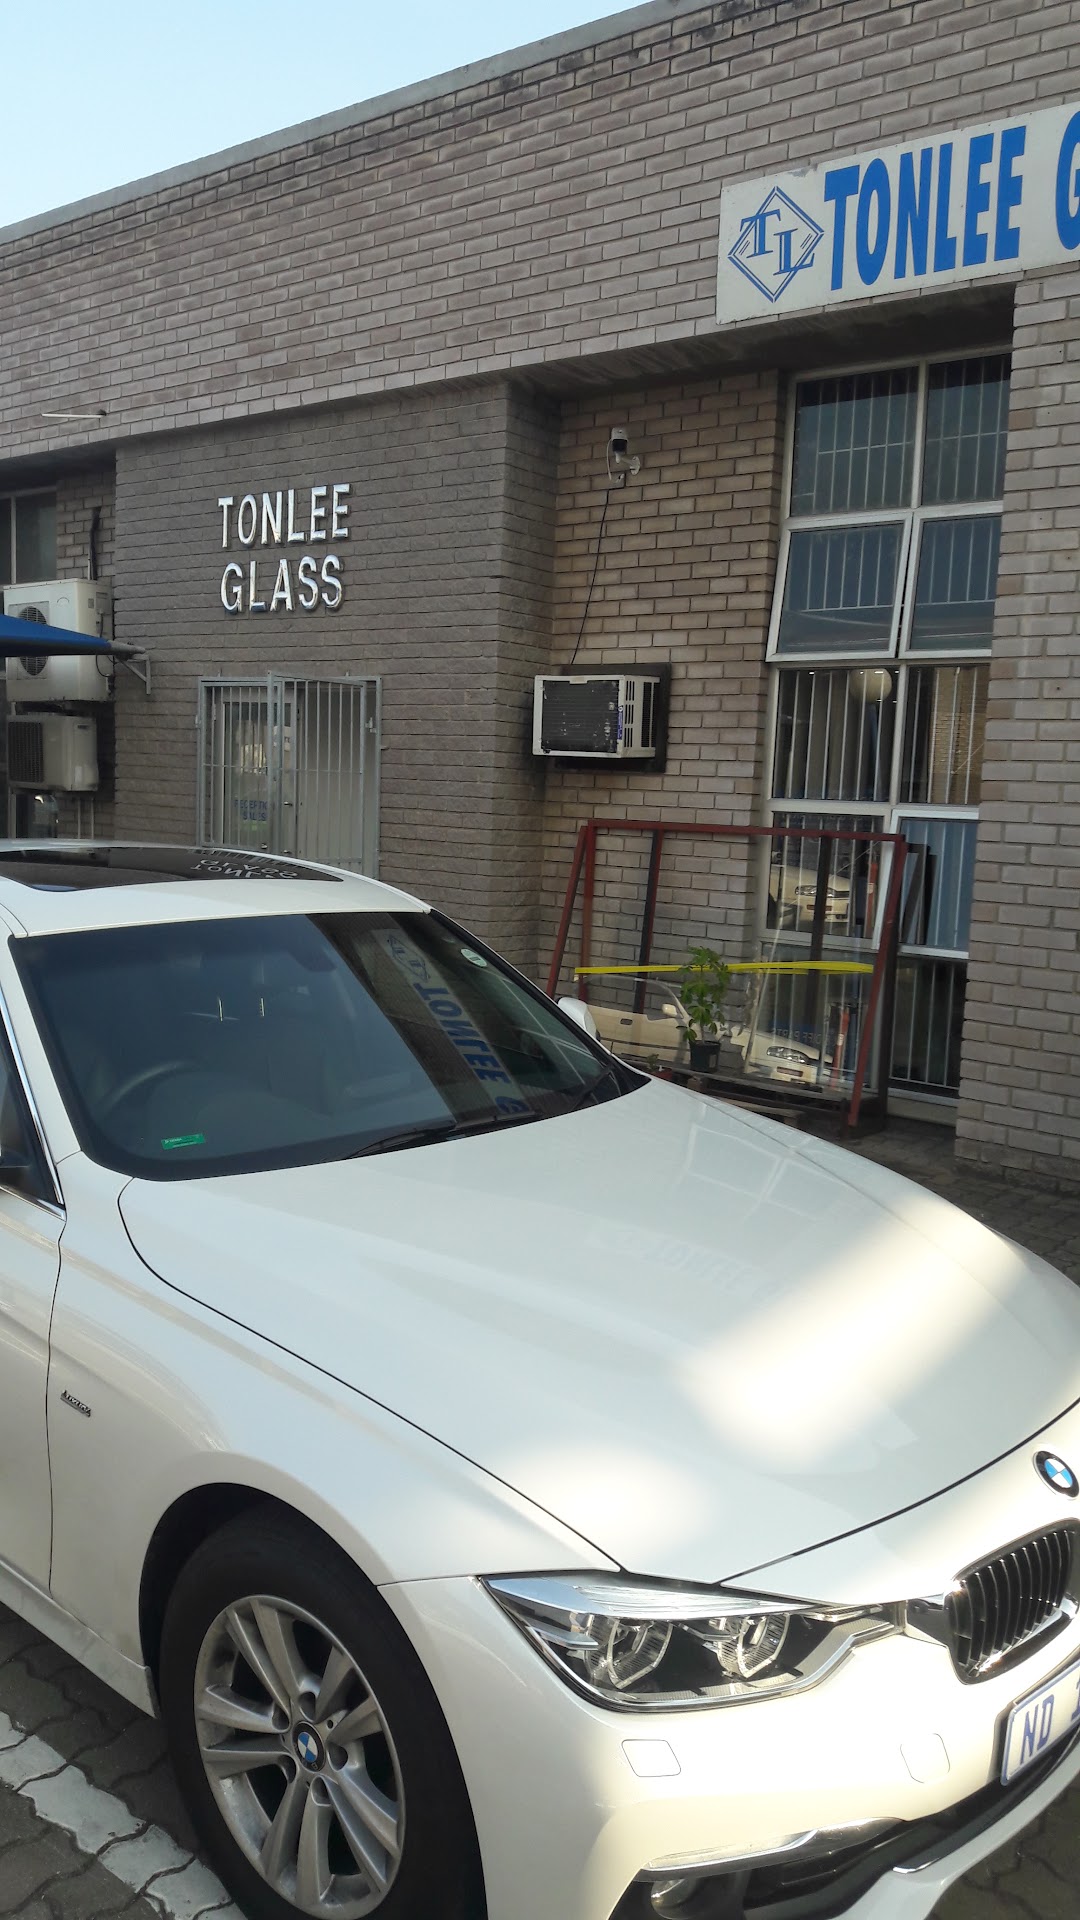 Tonlee Glass